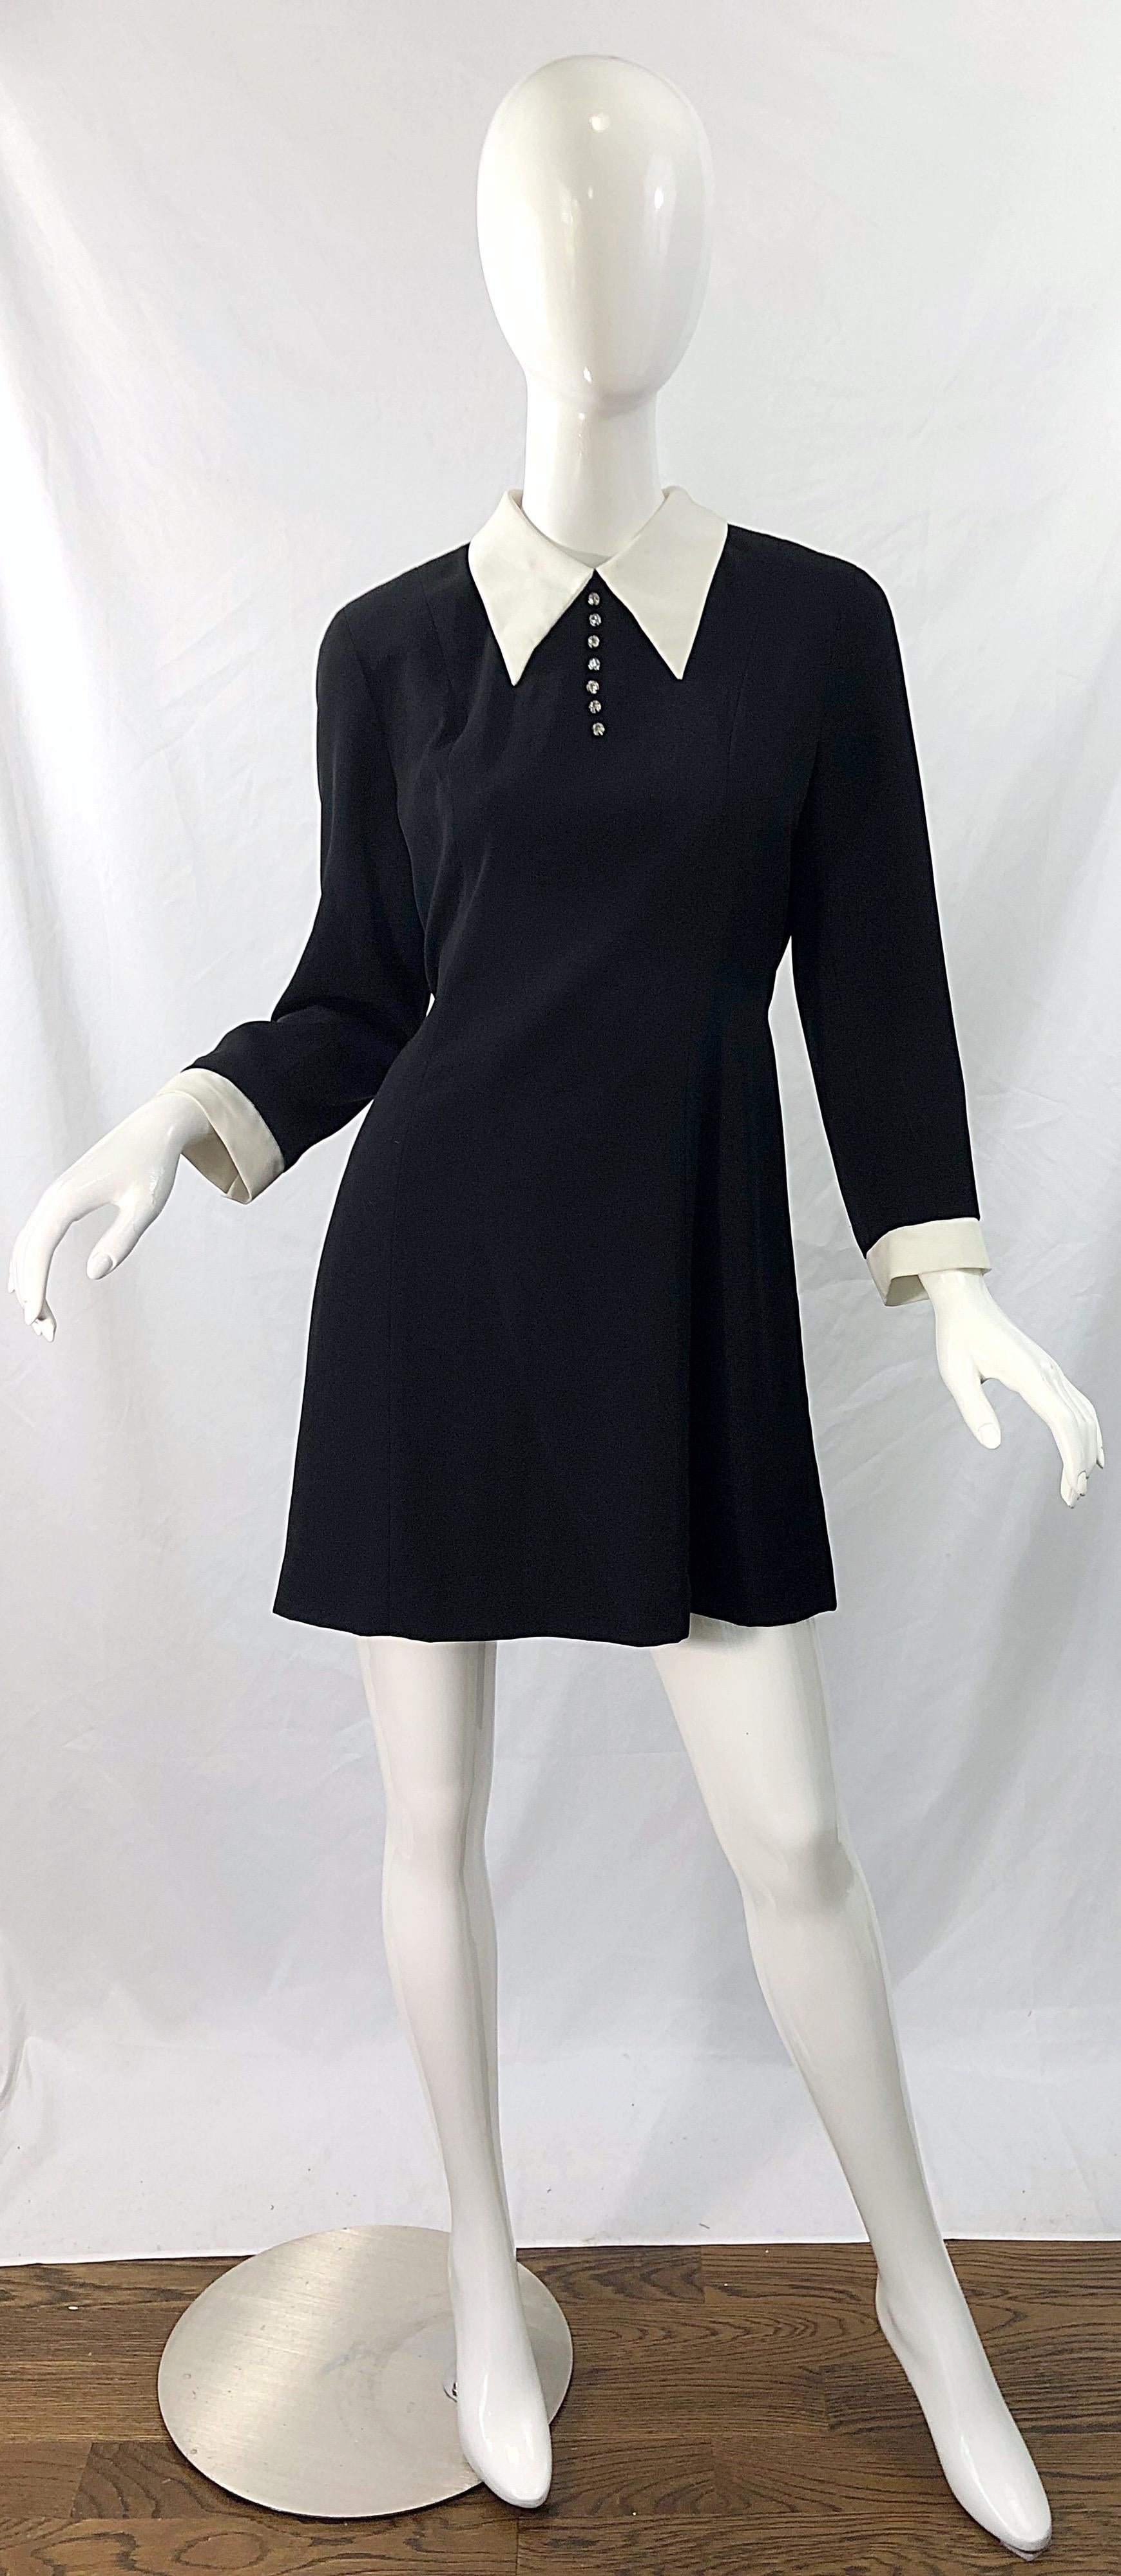 Vintage Givenchy 1990s Black and White Rhinestone Long Sleeve 90s Mini Dress For Sale 7